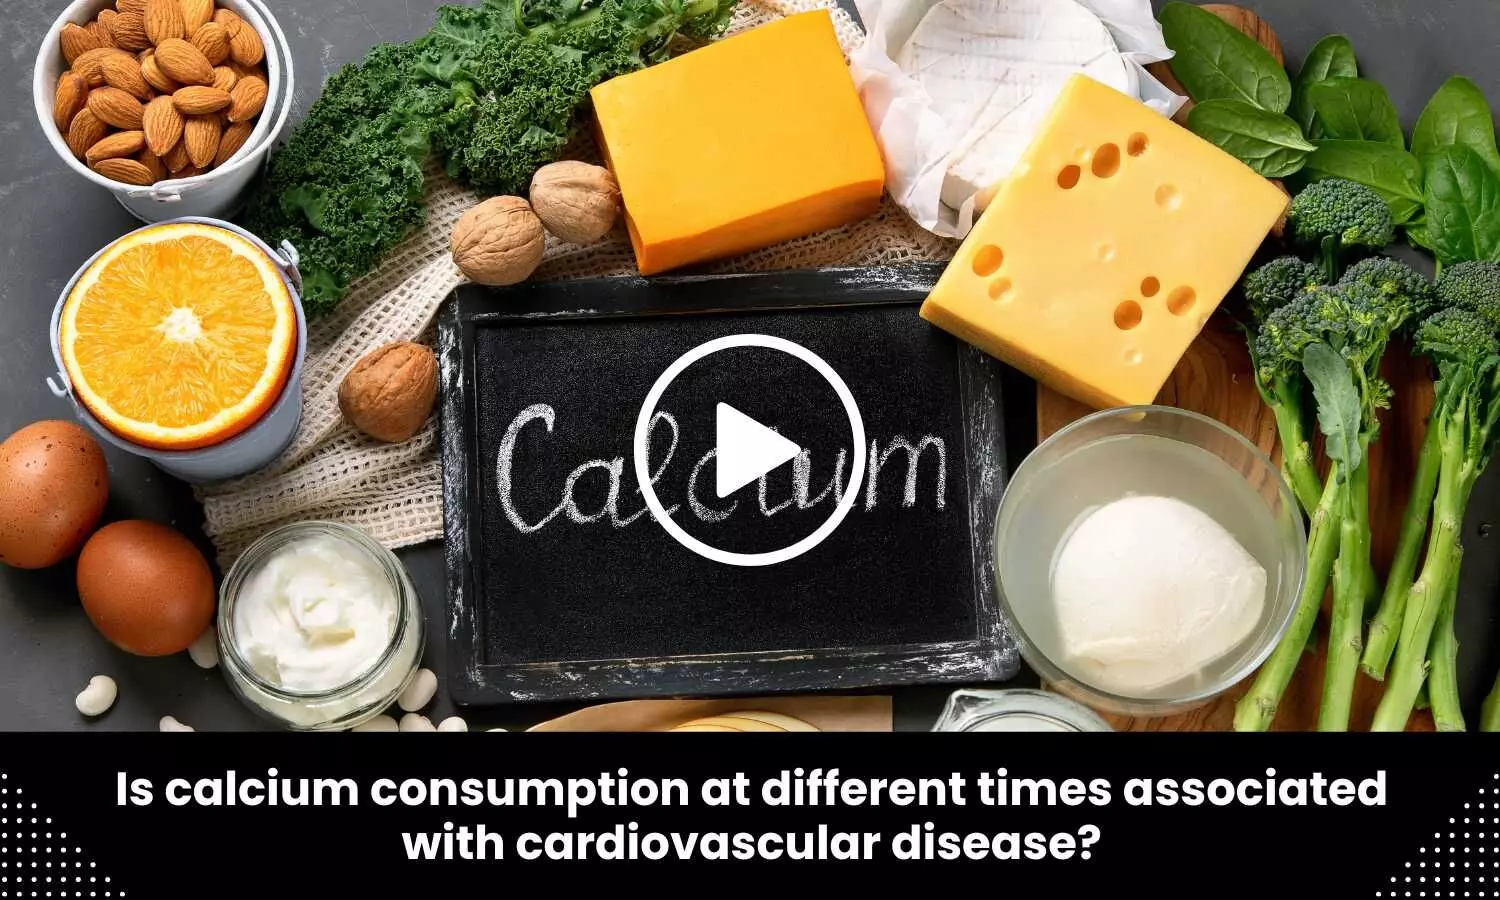 Is calcium consumption at different times associated with cardiovascular disease?